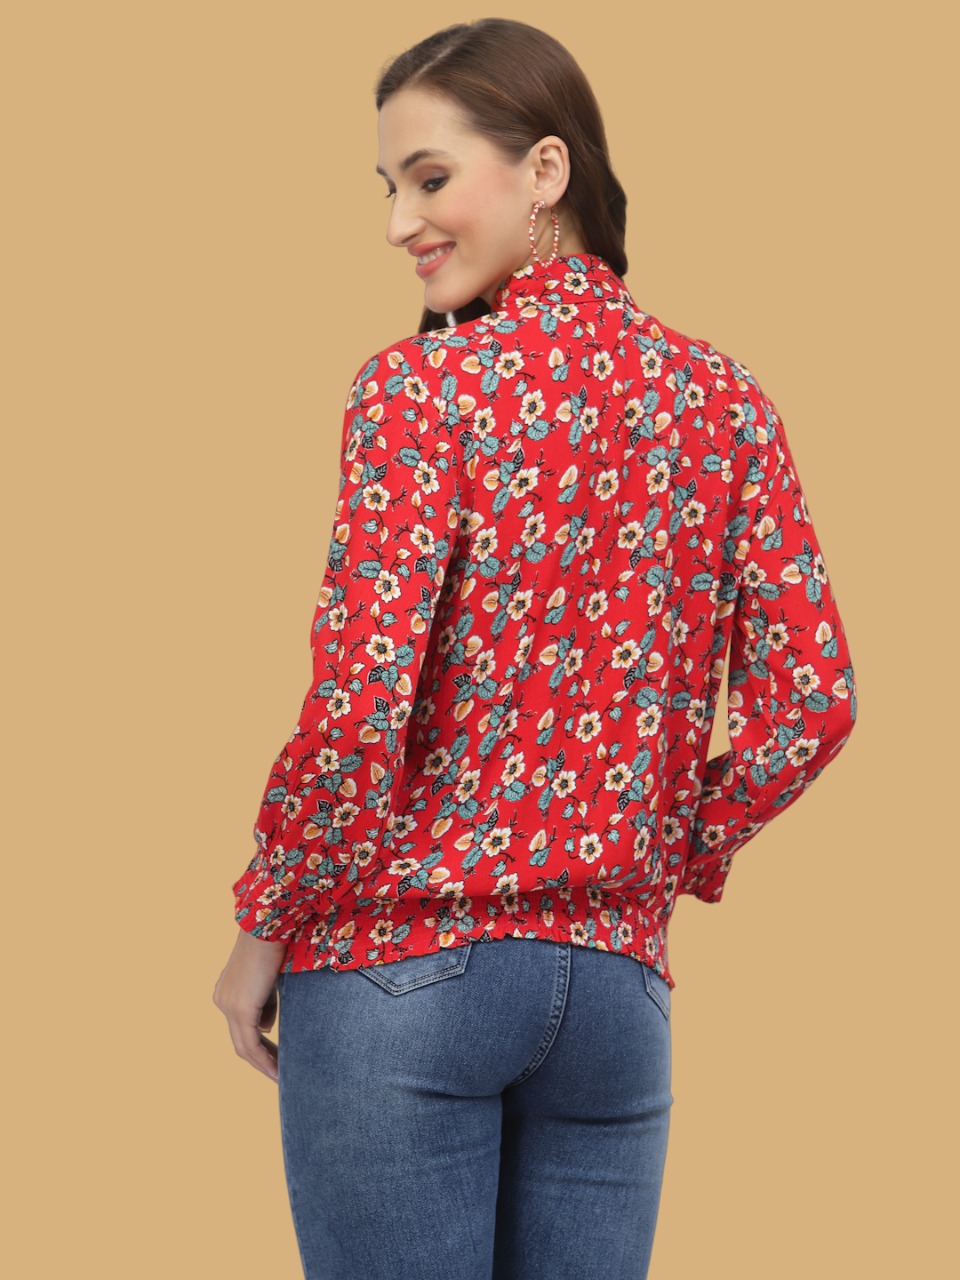 Flawless Women Shirt Style Red Floral Top Being Flawless